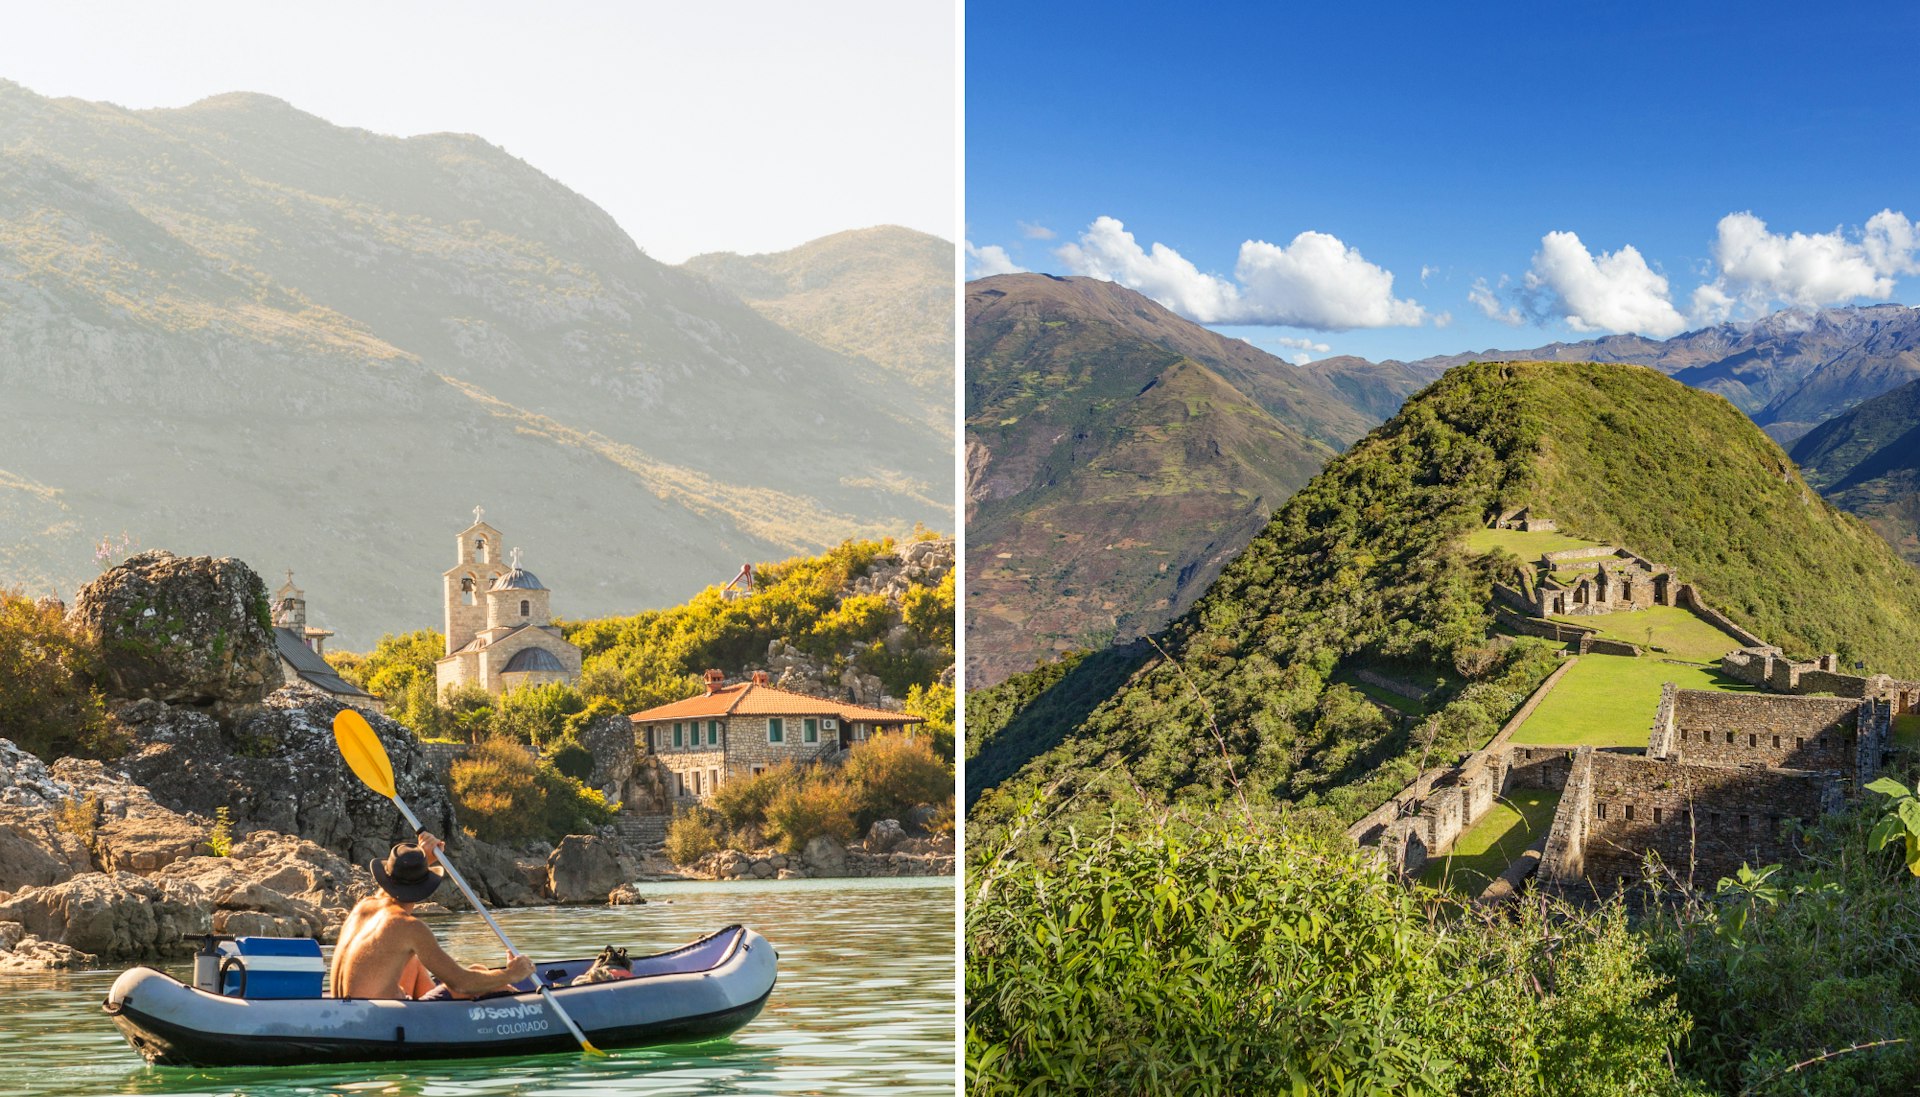 Explore Montenegro in fall; hike up to lesser-known Inca ruins in the Cusco region of Peru